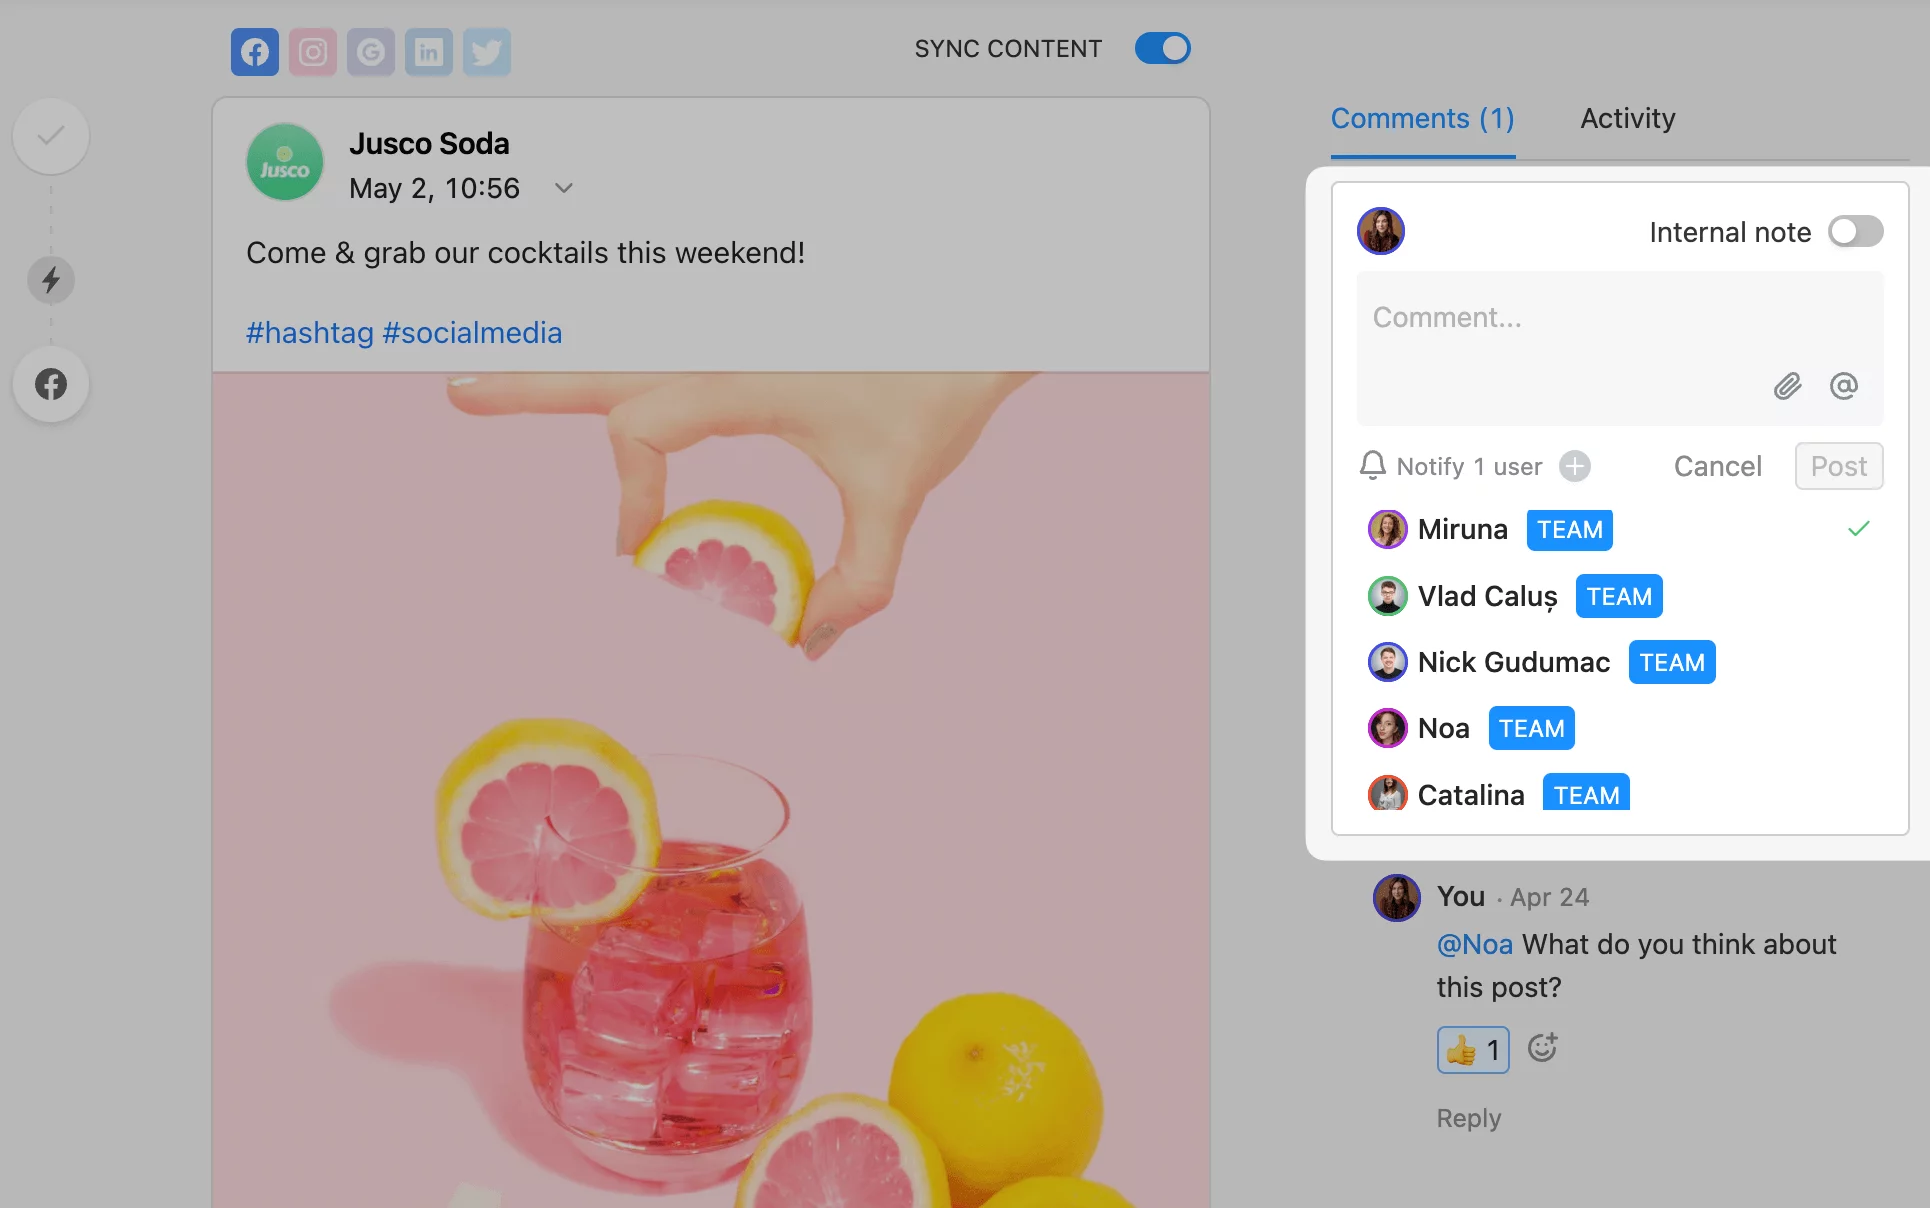 Team collaboration on a social media post, with personal notifications, optional internal note toggle and the ability to add attachments.